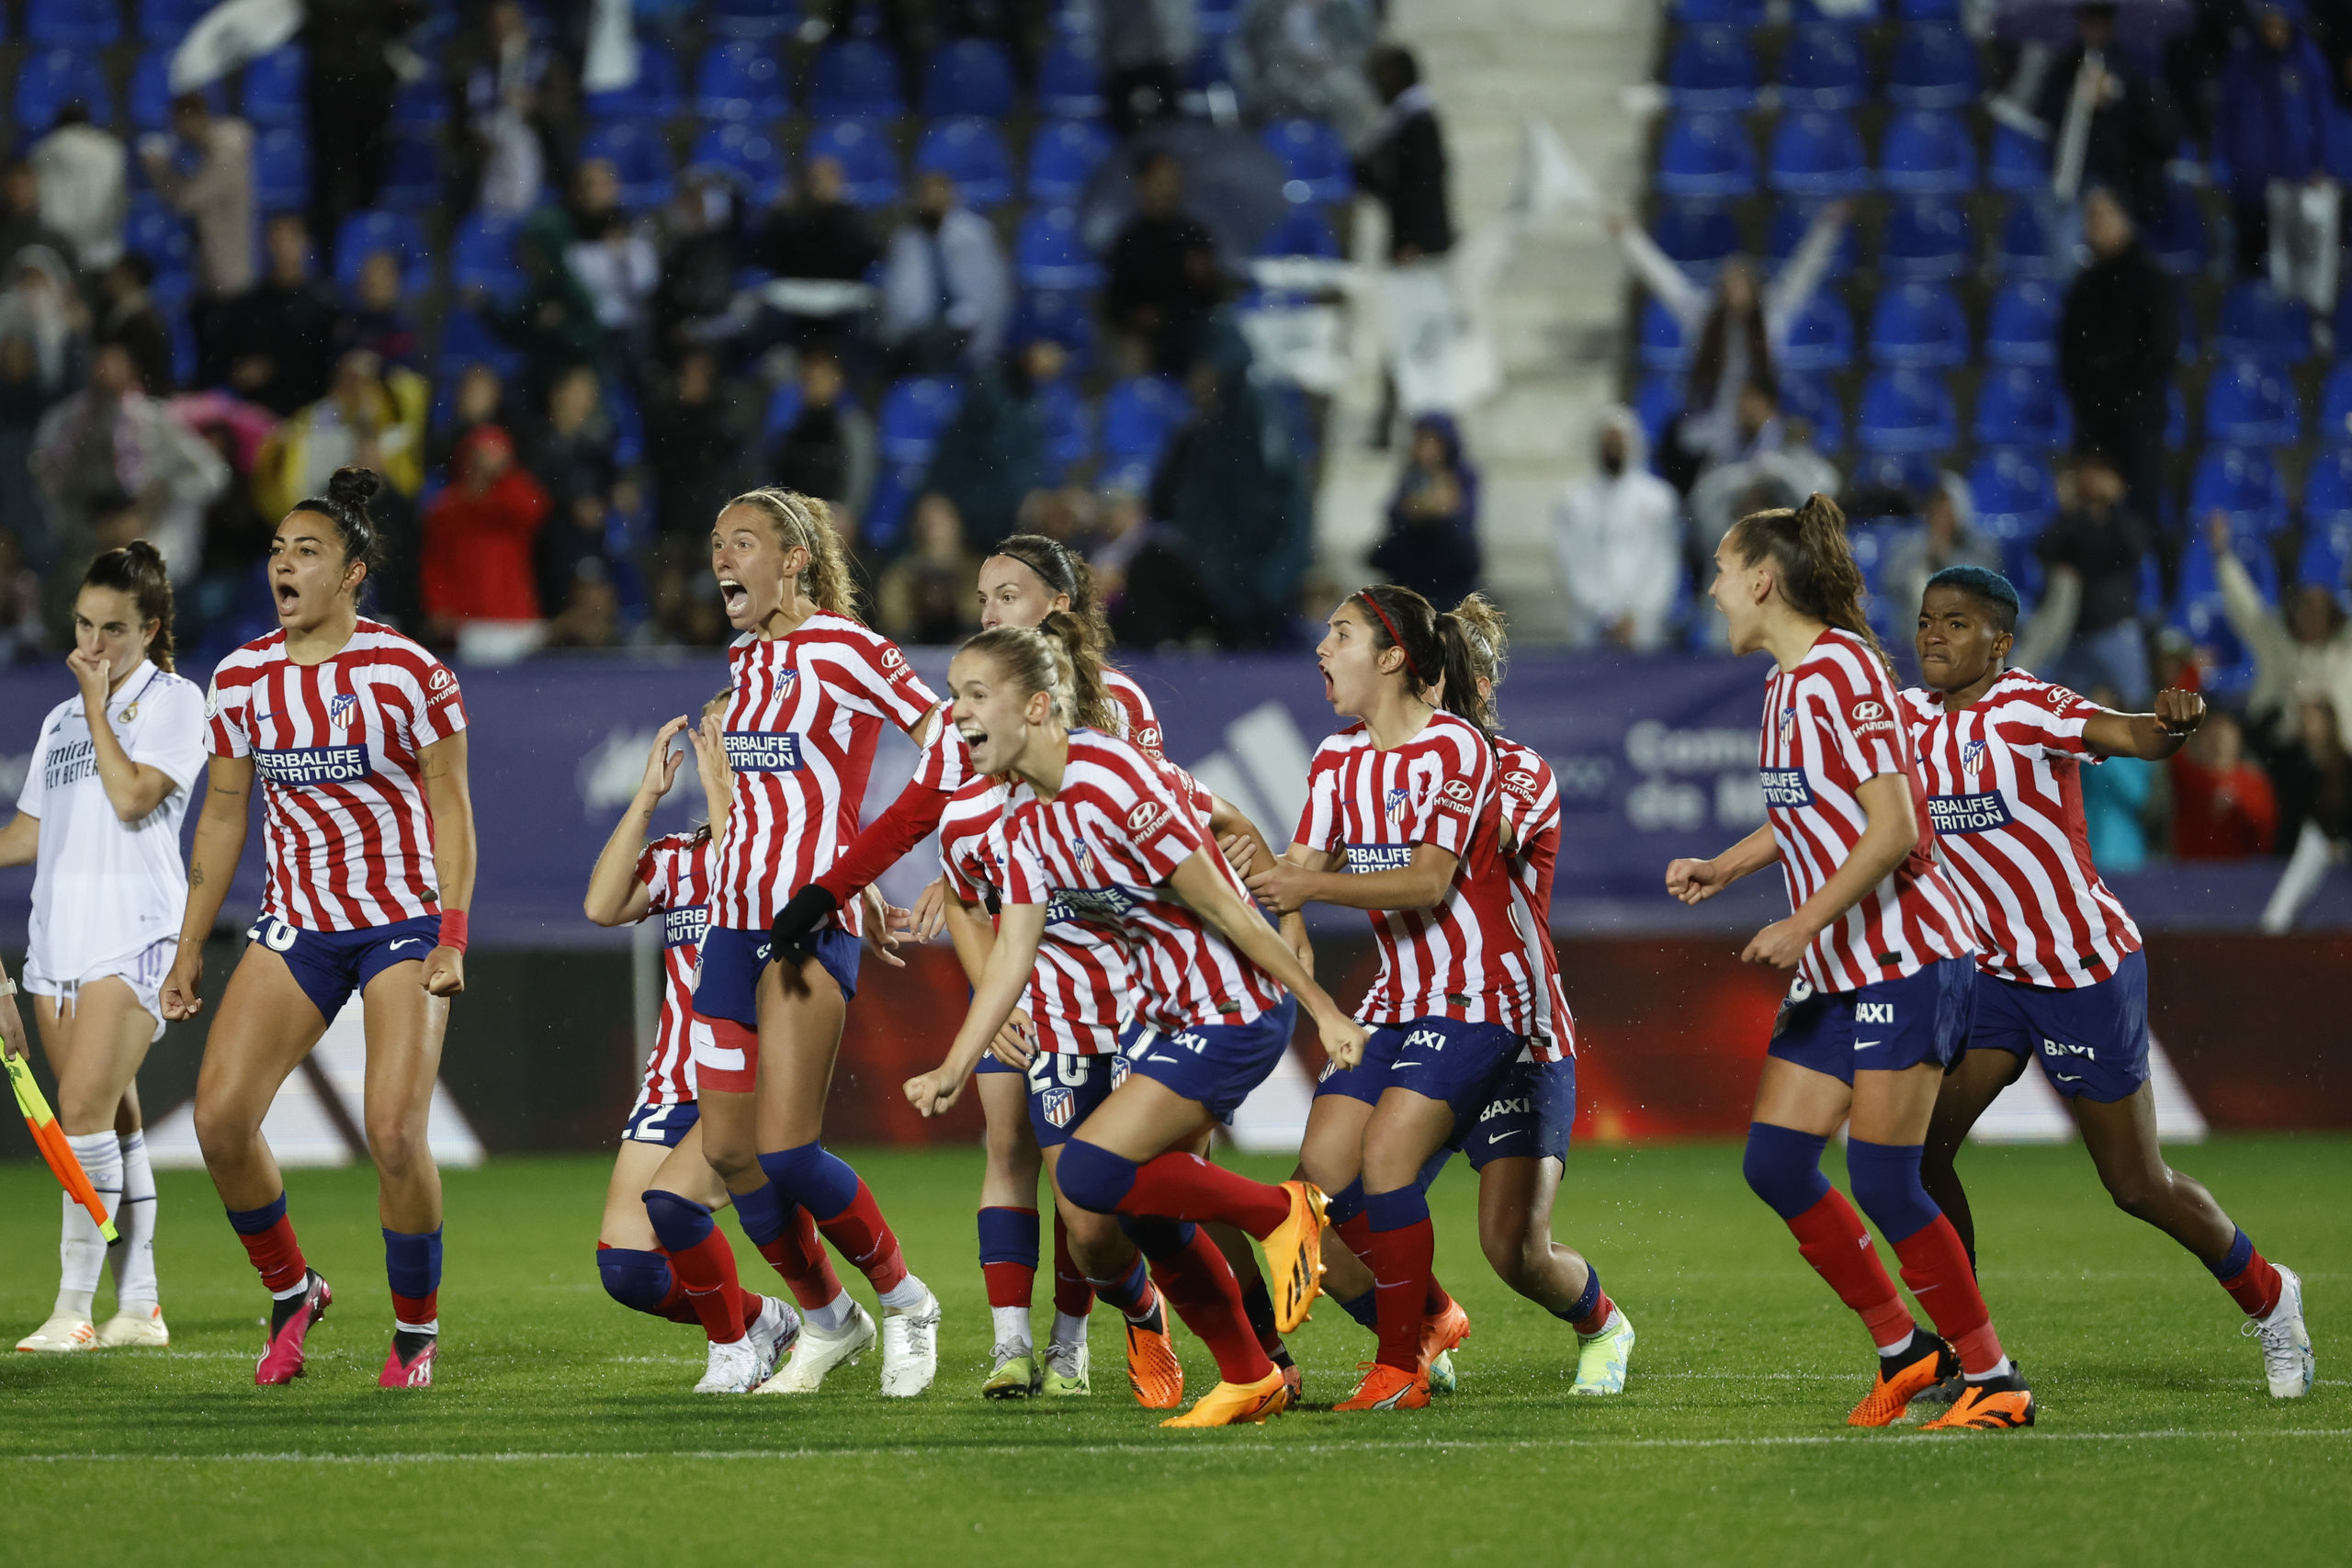 Penalties and heroics give Atlético their second Copa Reina